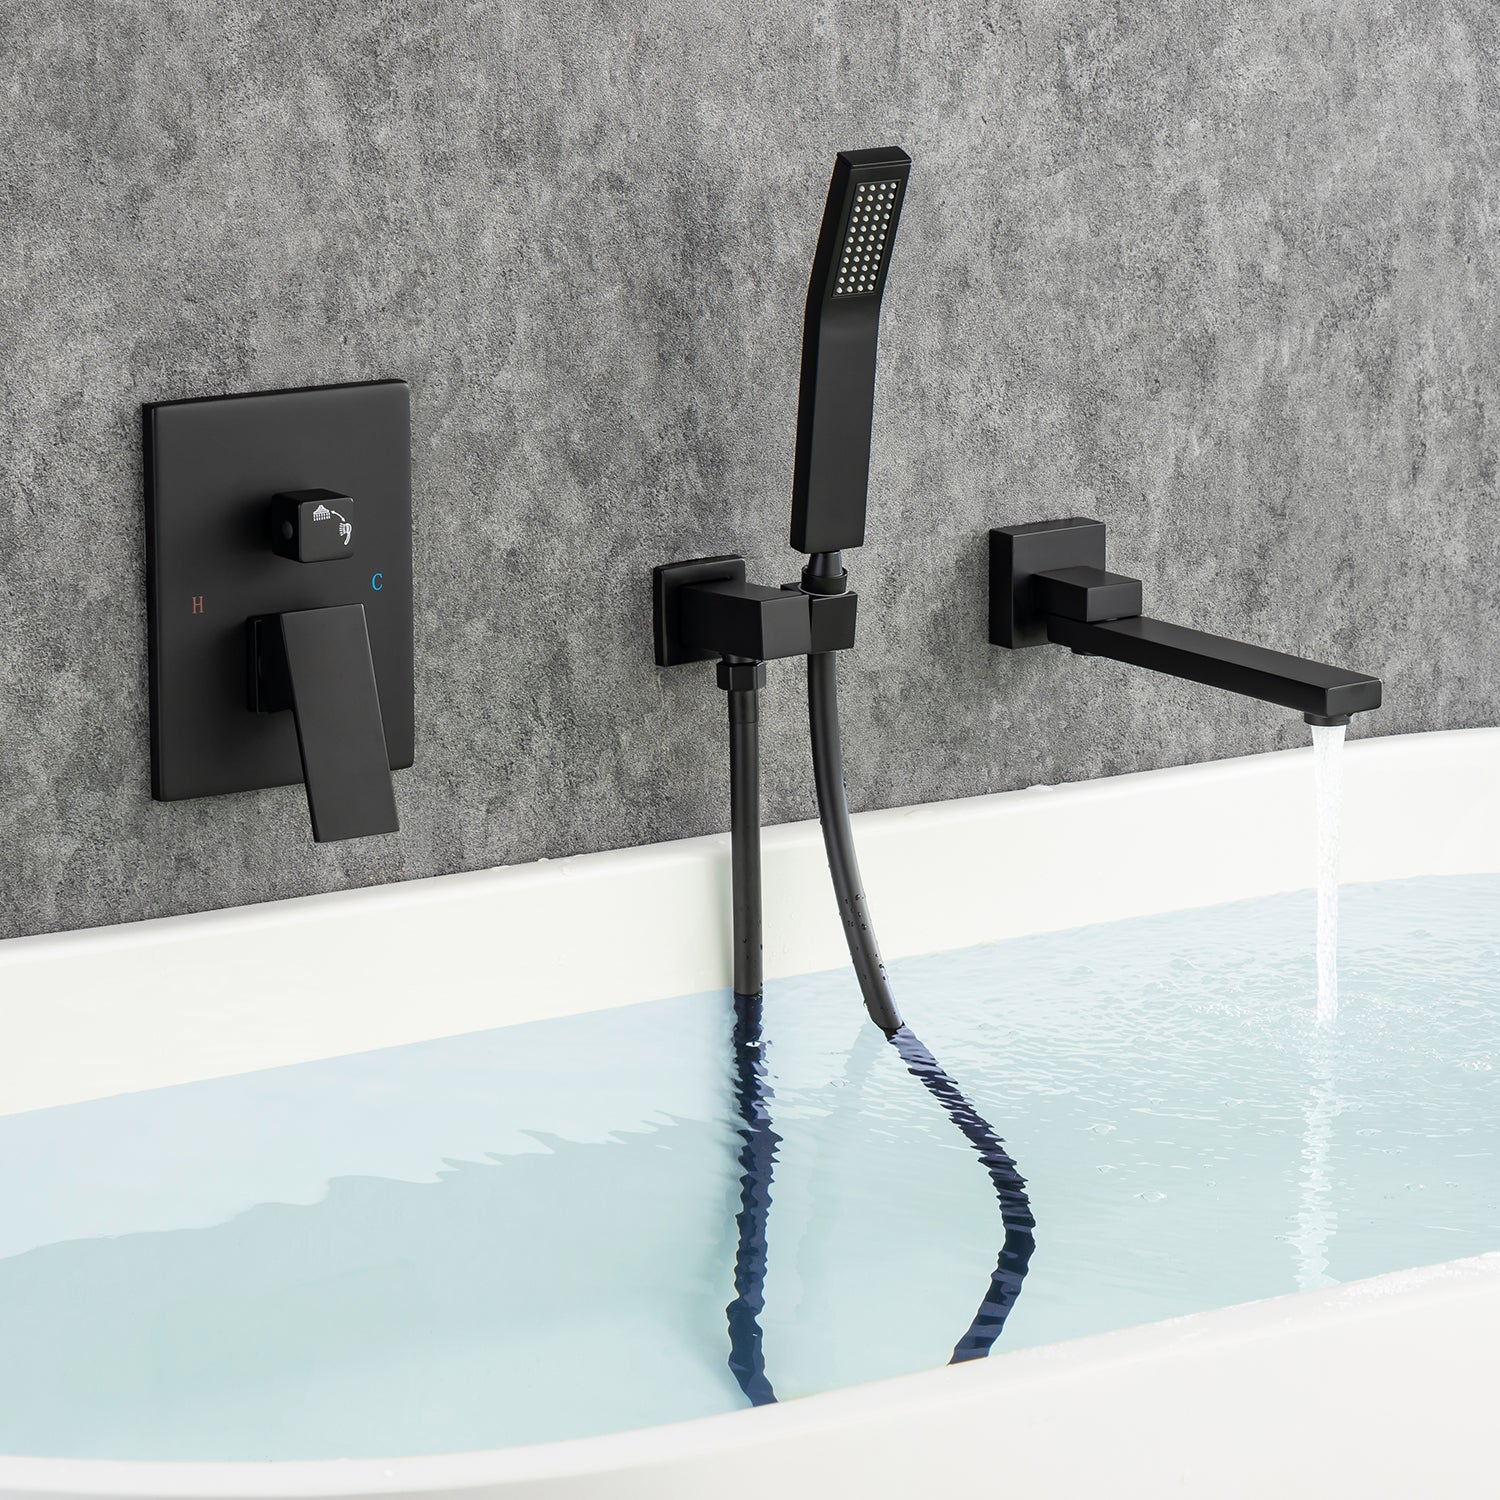 [Rainlex 93107] Tub and Shower Faucet with Rough-in Valve